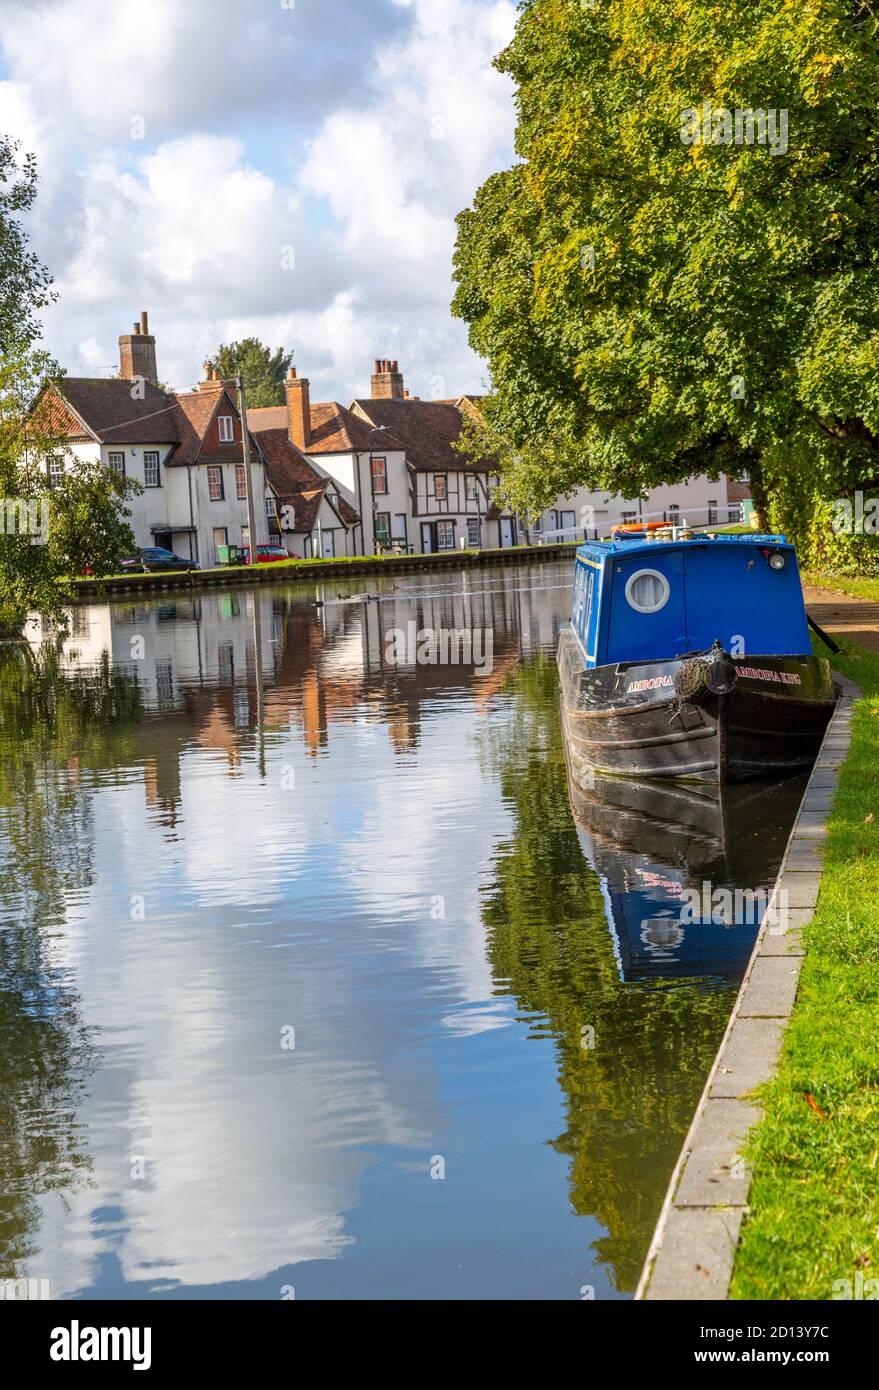 Narrow boat on the Kennet and Avon canal in the town centre of Newbury, Berkshire, England, UK Stock Photo